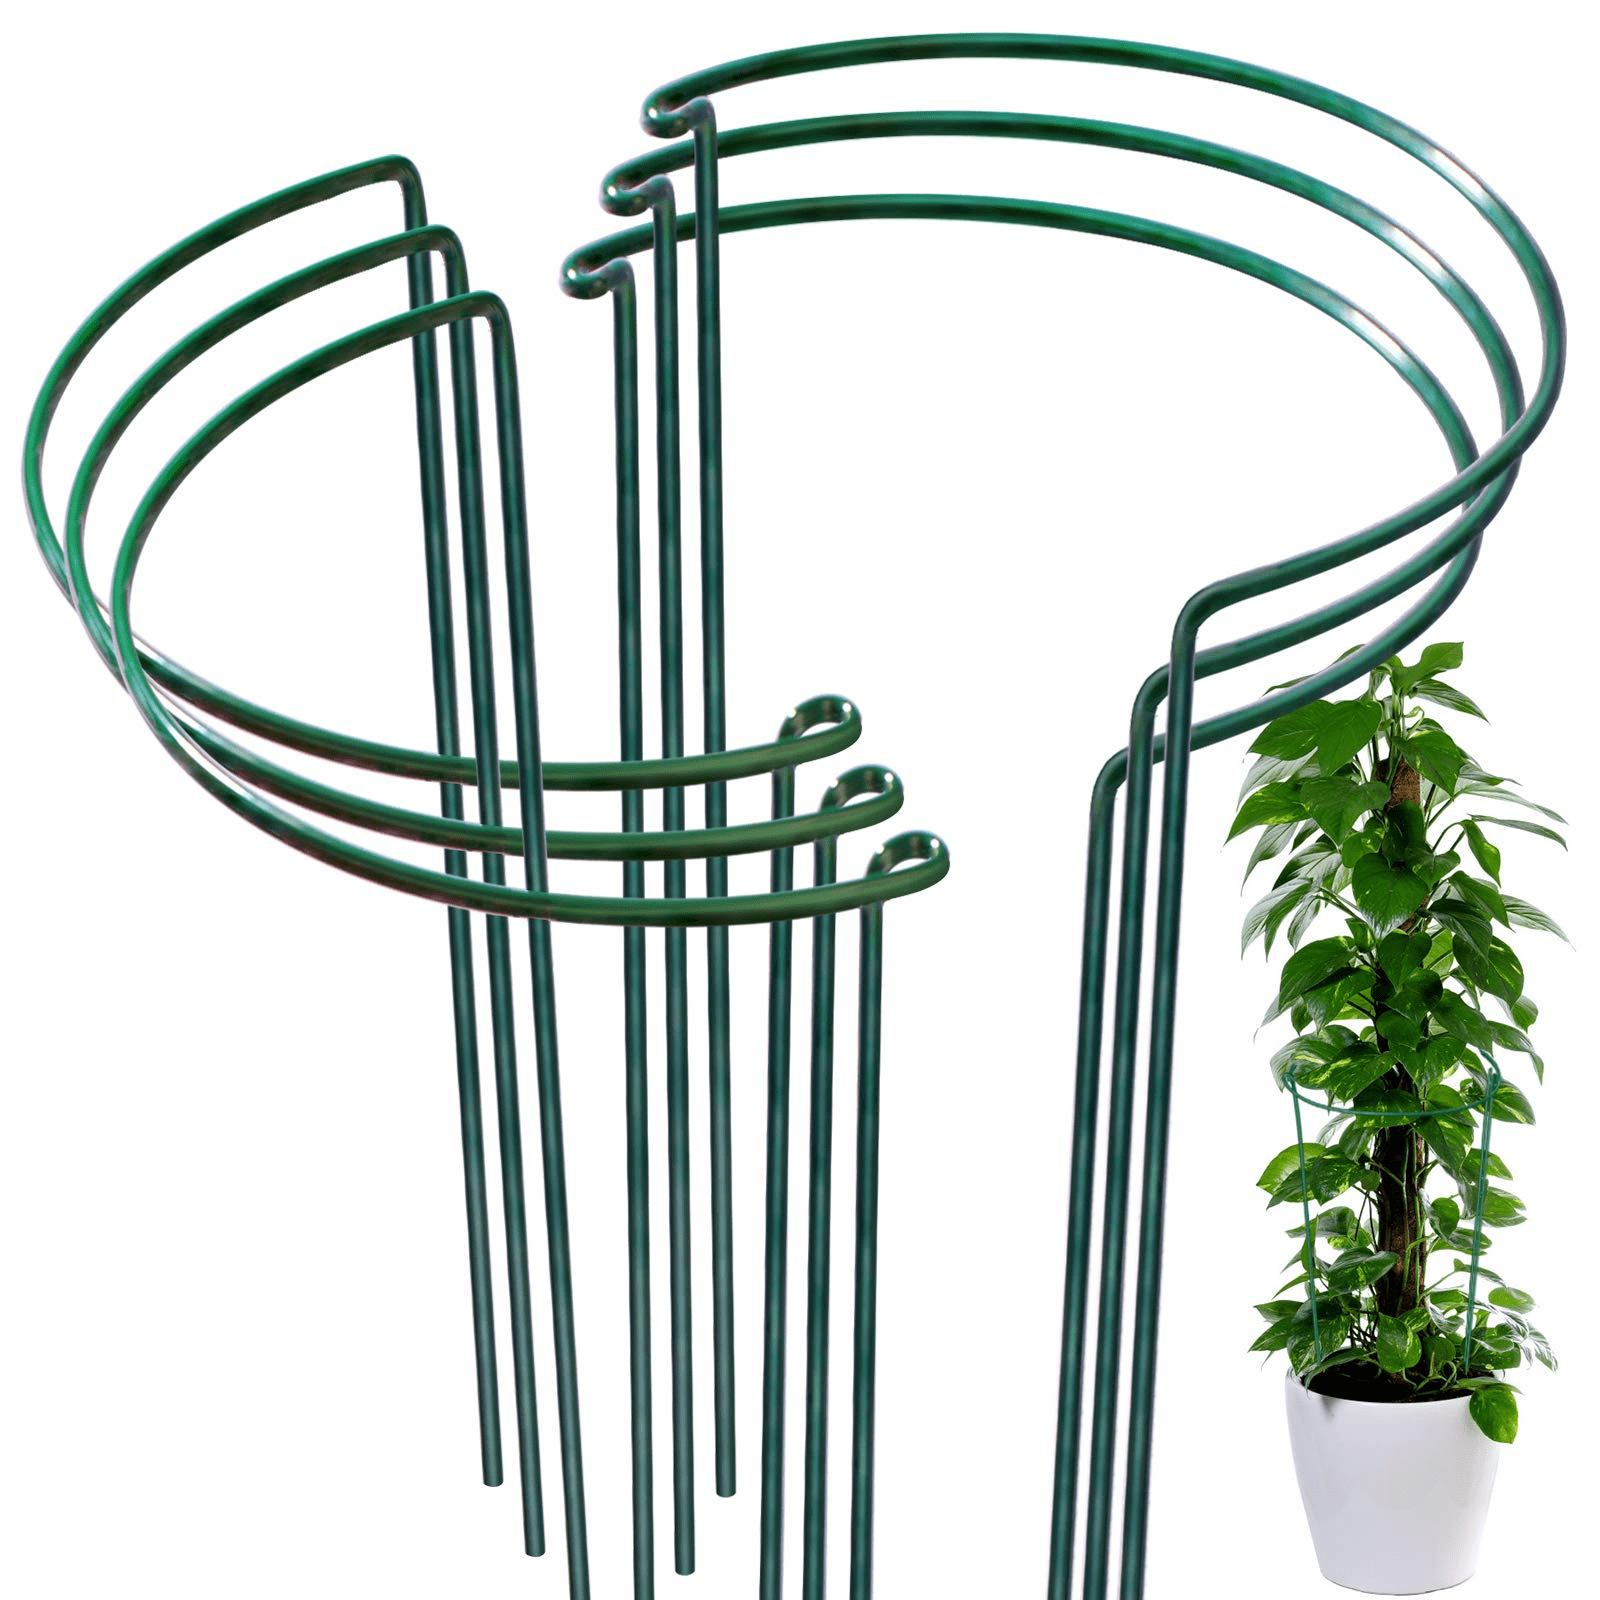 100PCS Garden Plant Clip Plant Support Clip Twisty Plant Ring For Holder Plants 